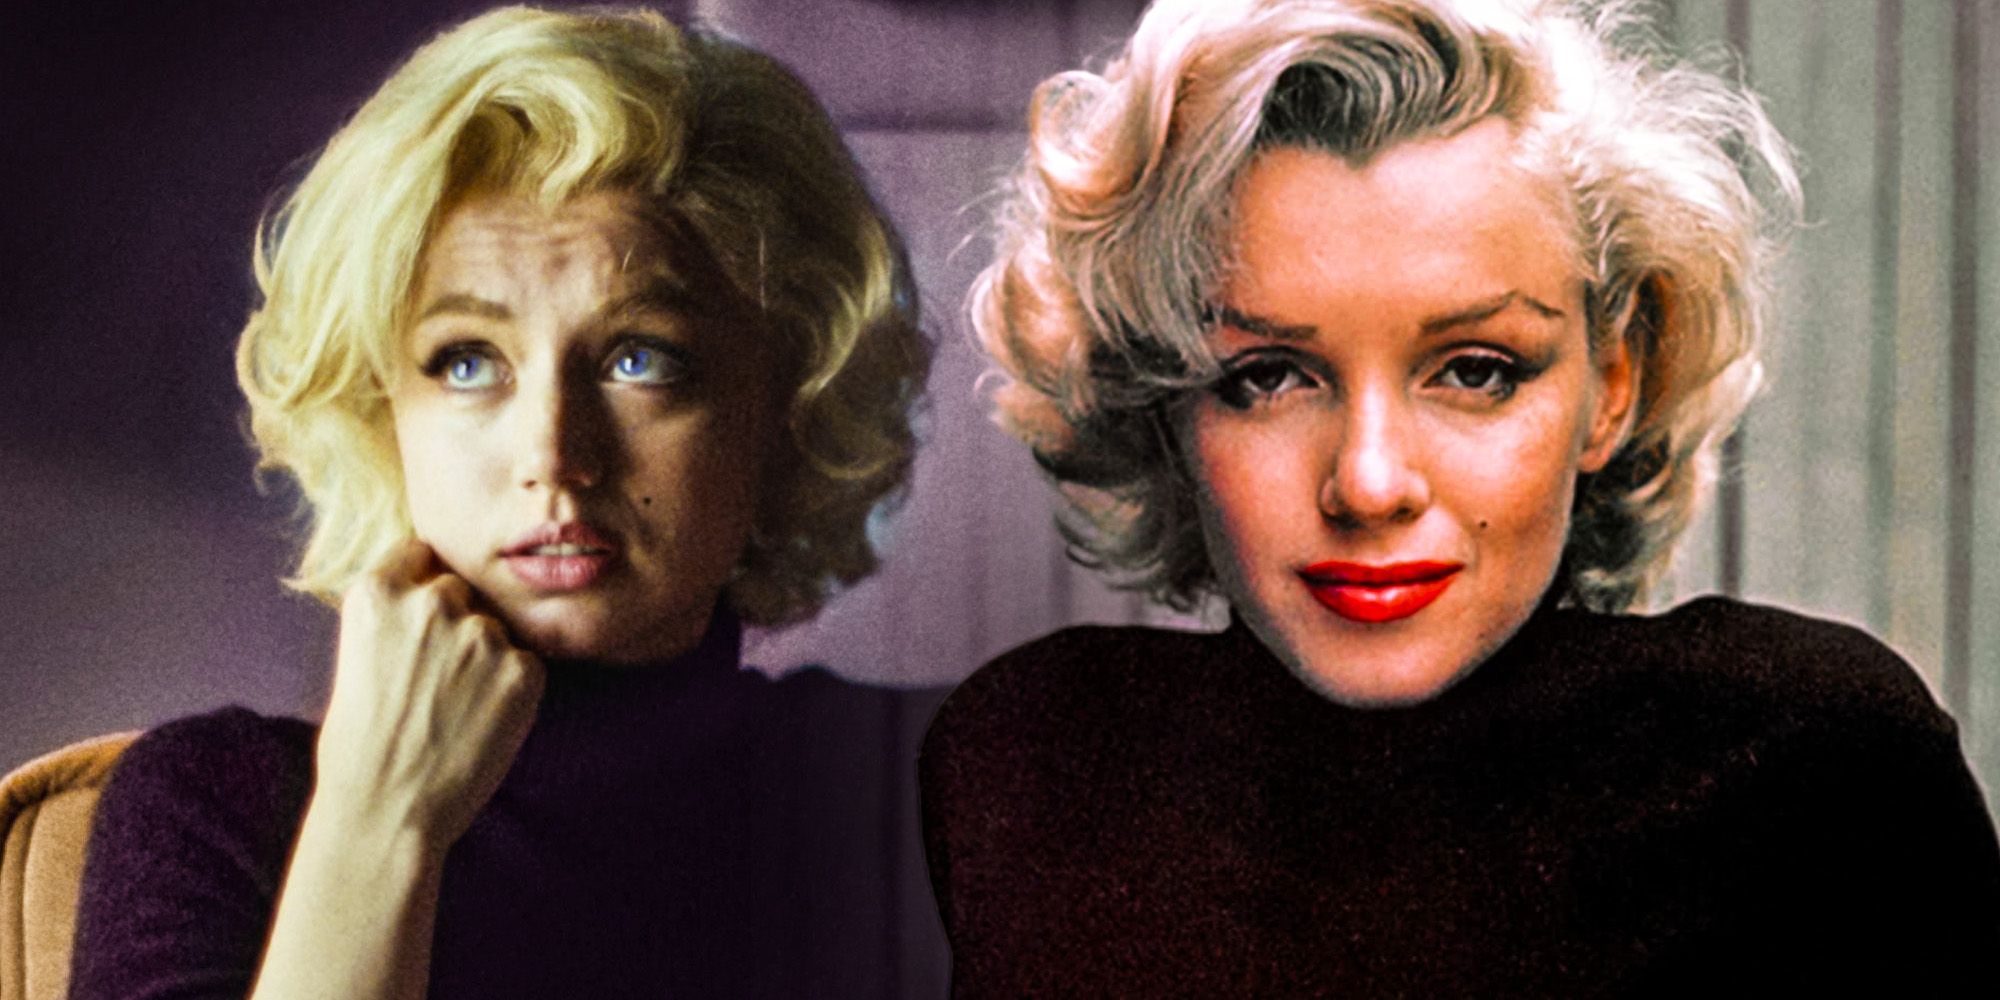 everything Blonde has to get right marilyn monroe